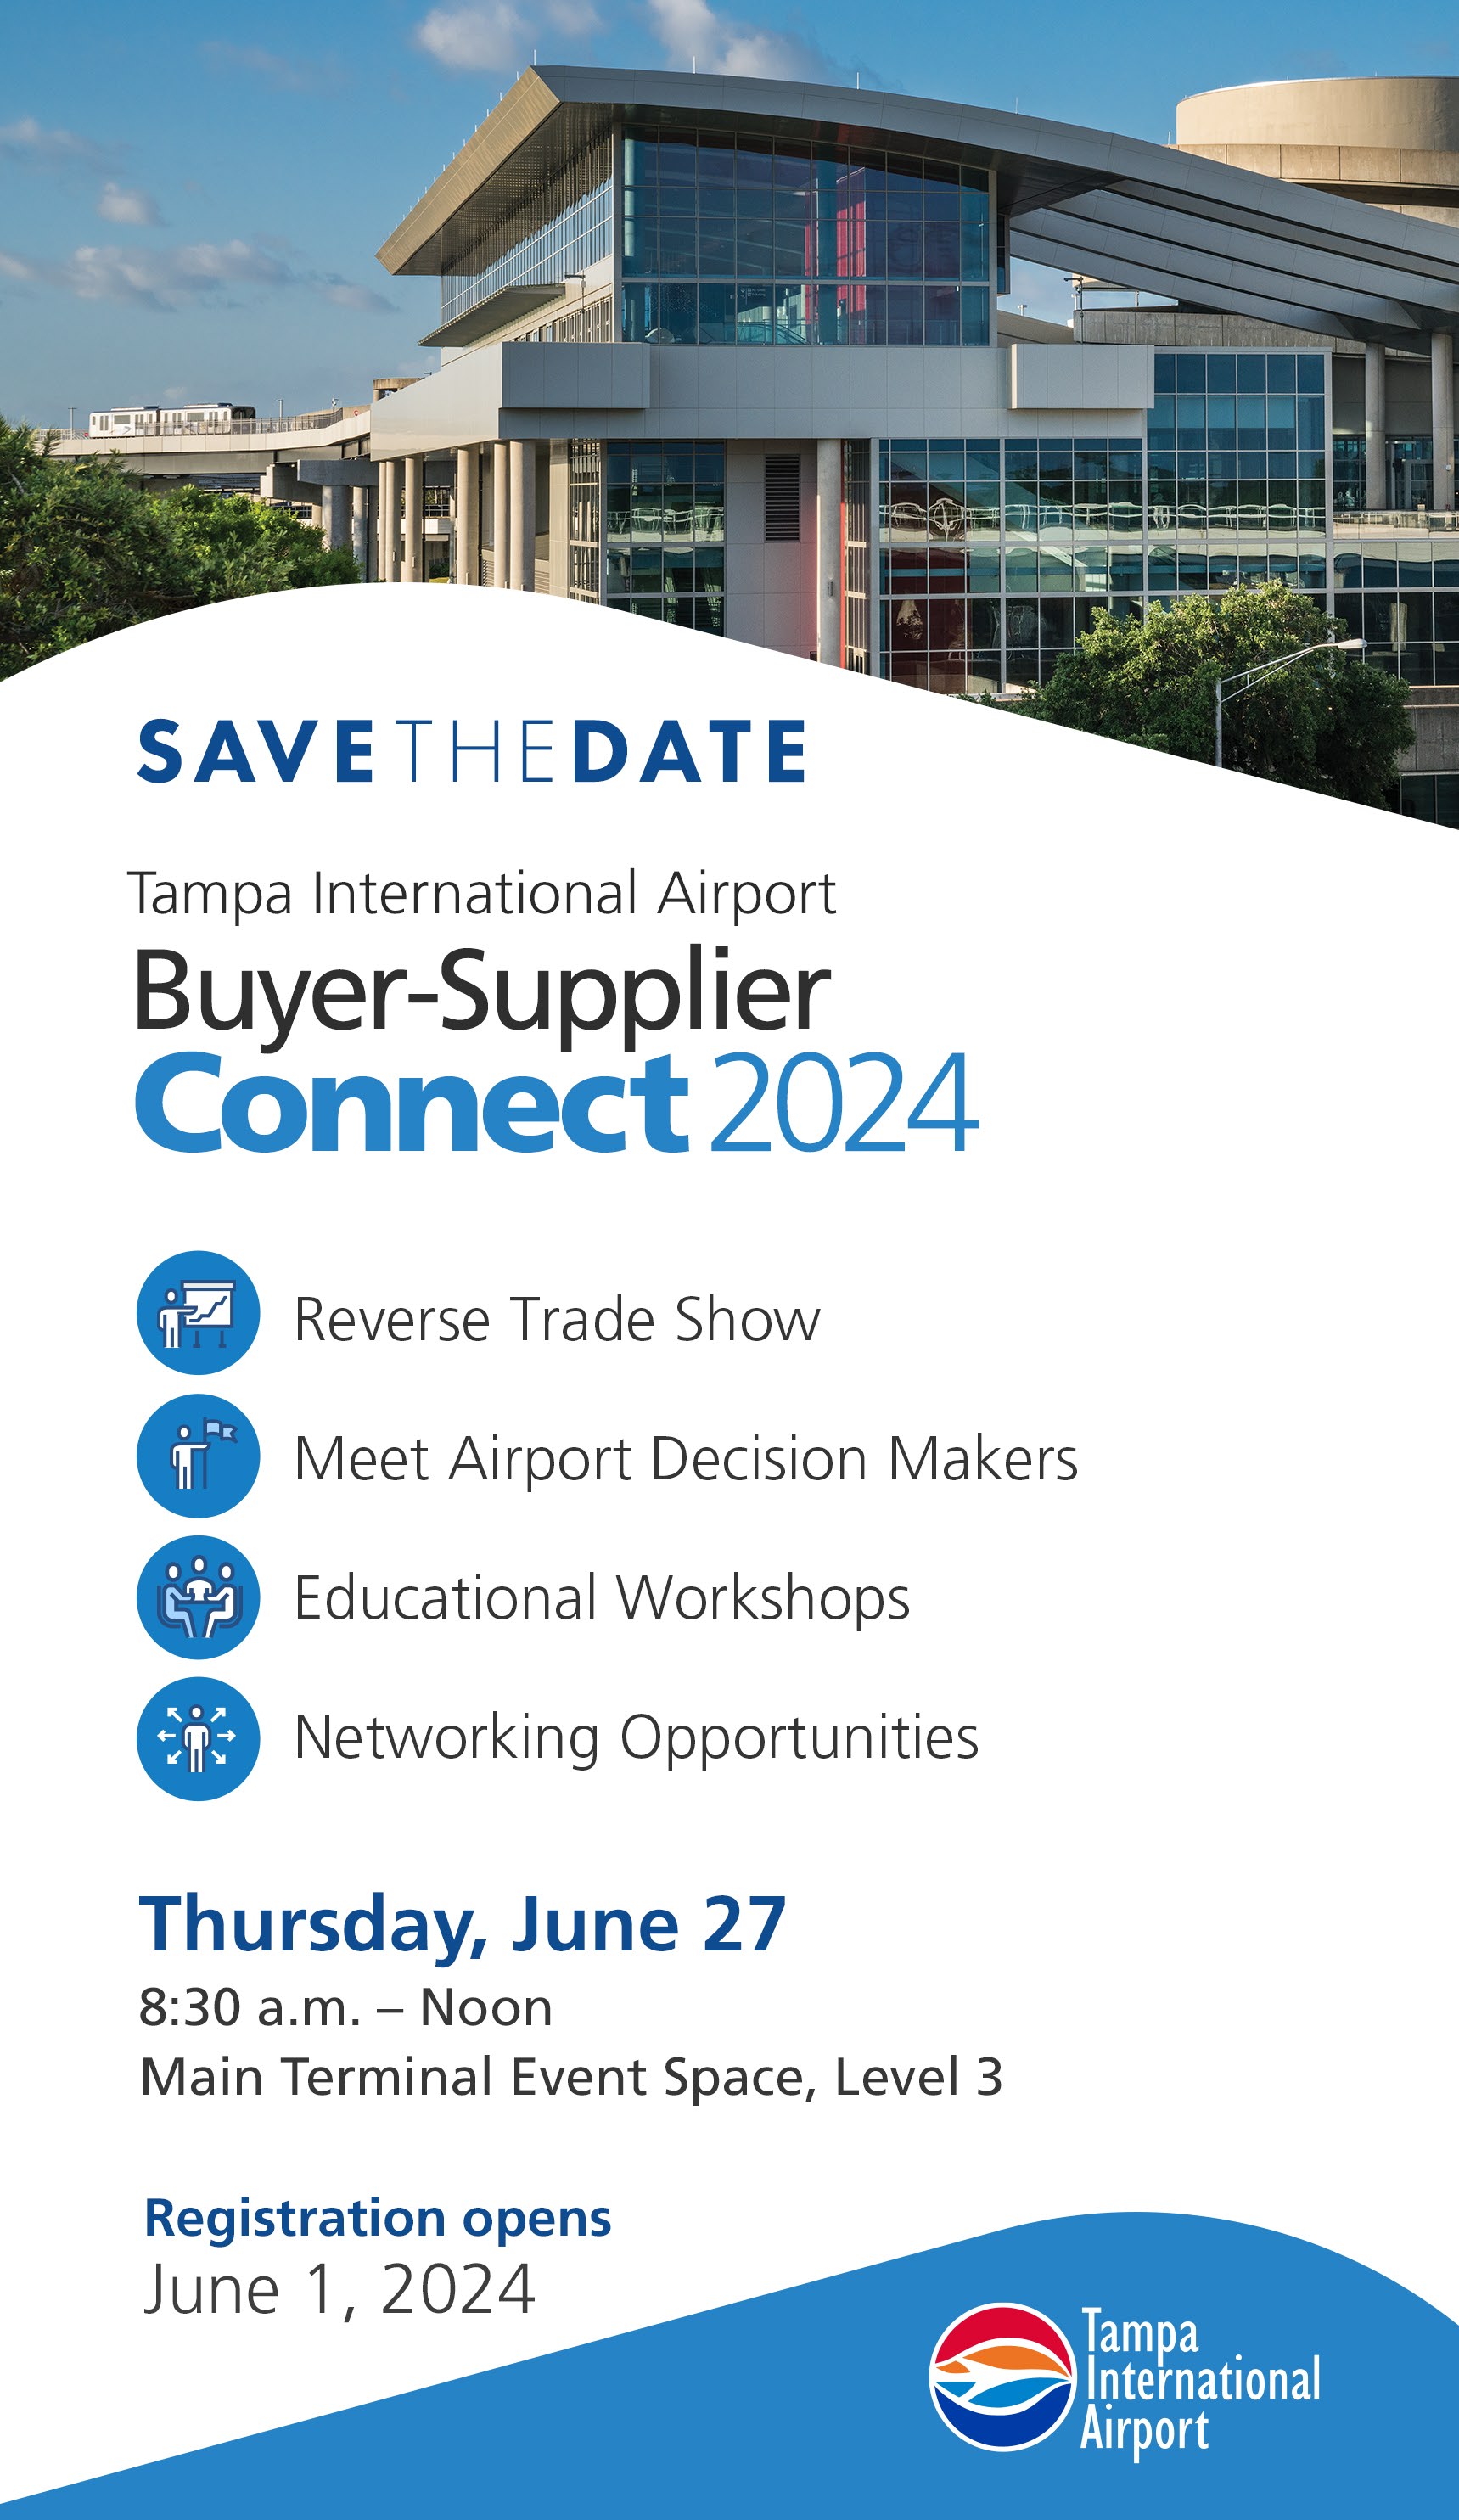 Save The Date. Tampa International Airport Buyer-Supplier Connect 2024. Thursday, June 27, 8:30am - Noon. Main Terminal Event Space, Level Three. Registration Opens June 1 2024